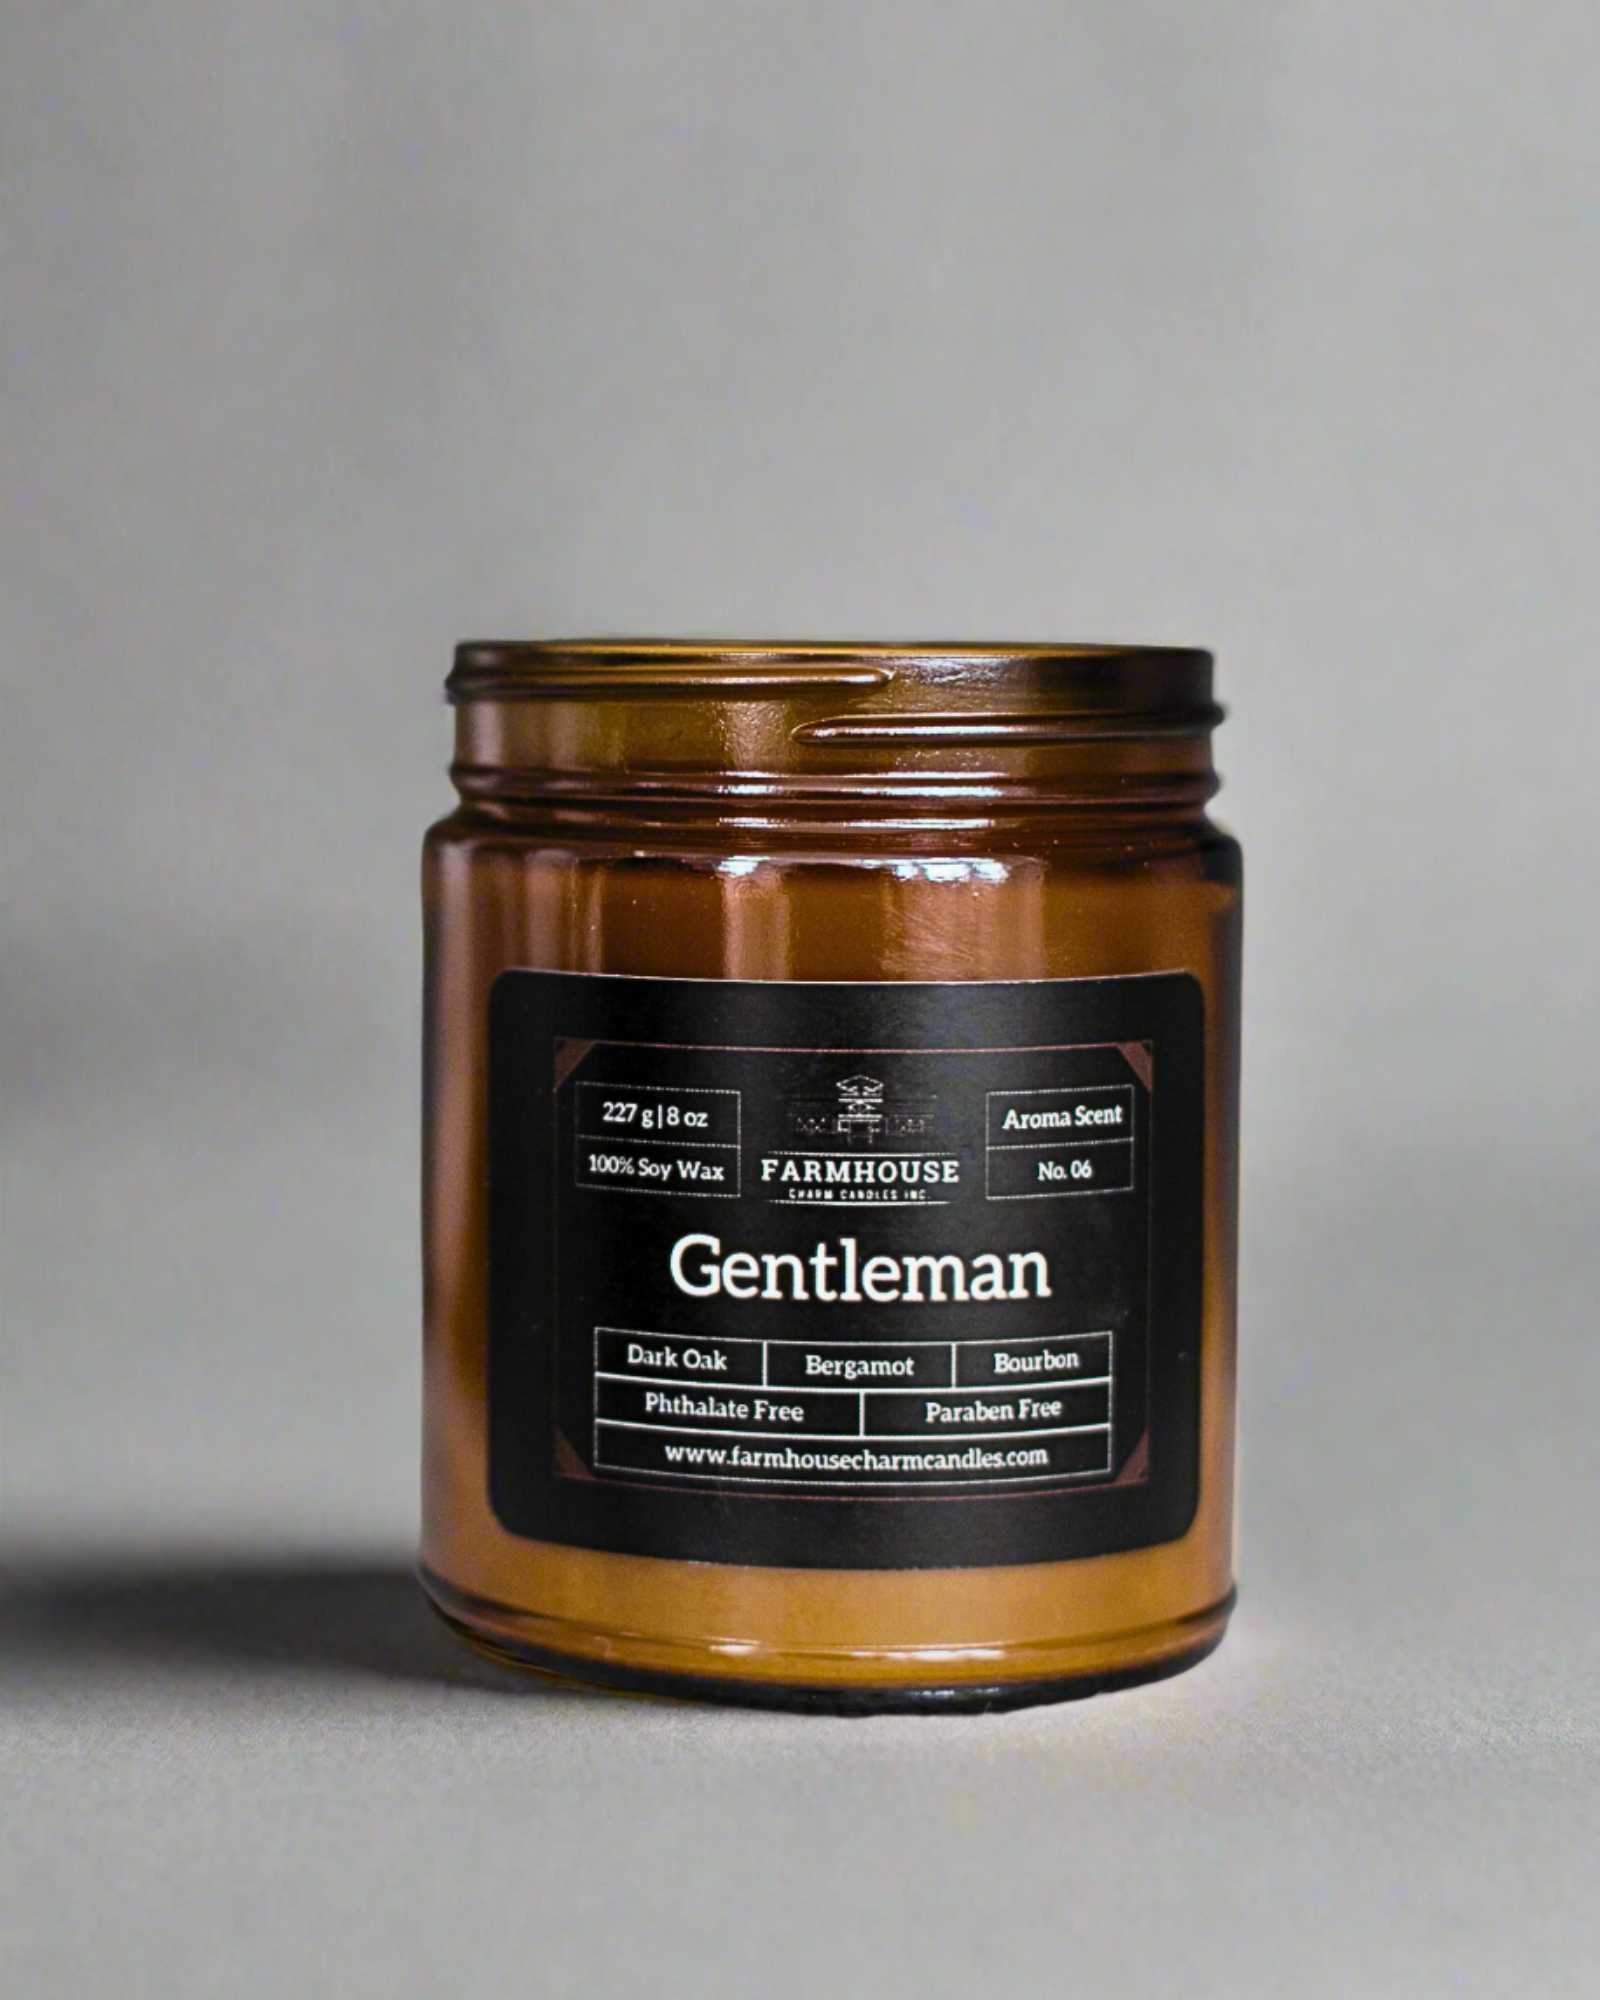 Ignite your senses with the Gentleman Soy Candle - Aroma Scent No. 6, a smooth and irresistible fragrance crafted to embody the essence of a true gentleman.  This soy candle features a powerful blend of dark oak, bergamot, and a dash of bourbon, creating an unforgettable aroma that will fill your home with sophistication and charm.  Rich Dark Oak: Brings the wilderness right into your living room. Lively Bergamot: Adds a burst of citrus freshness. Subtle Bourbon  www.farmhousecharmcandles.com